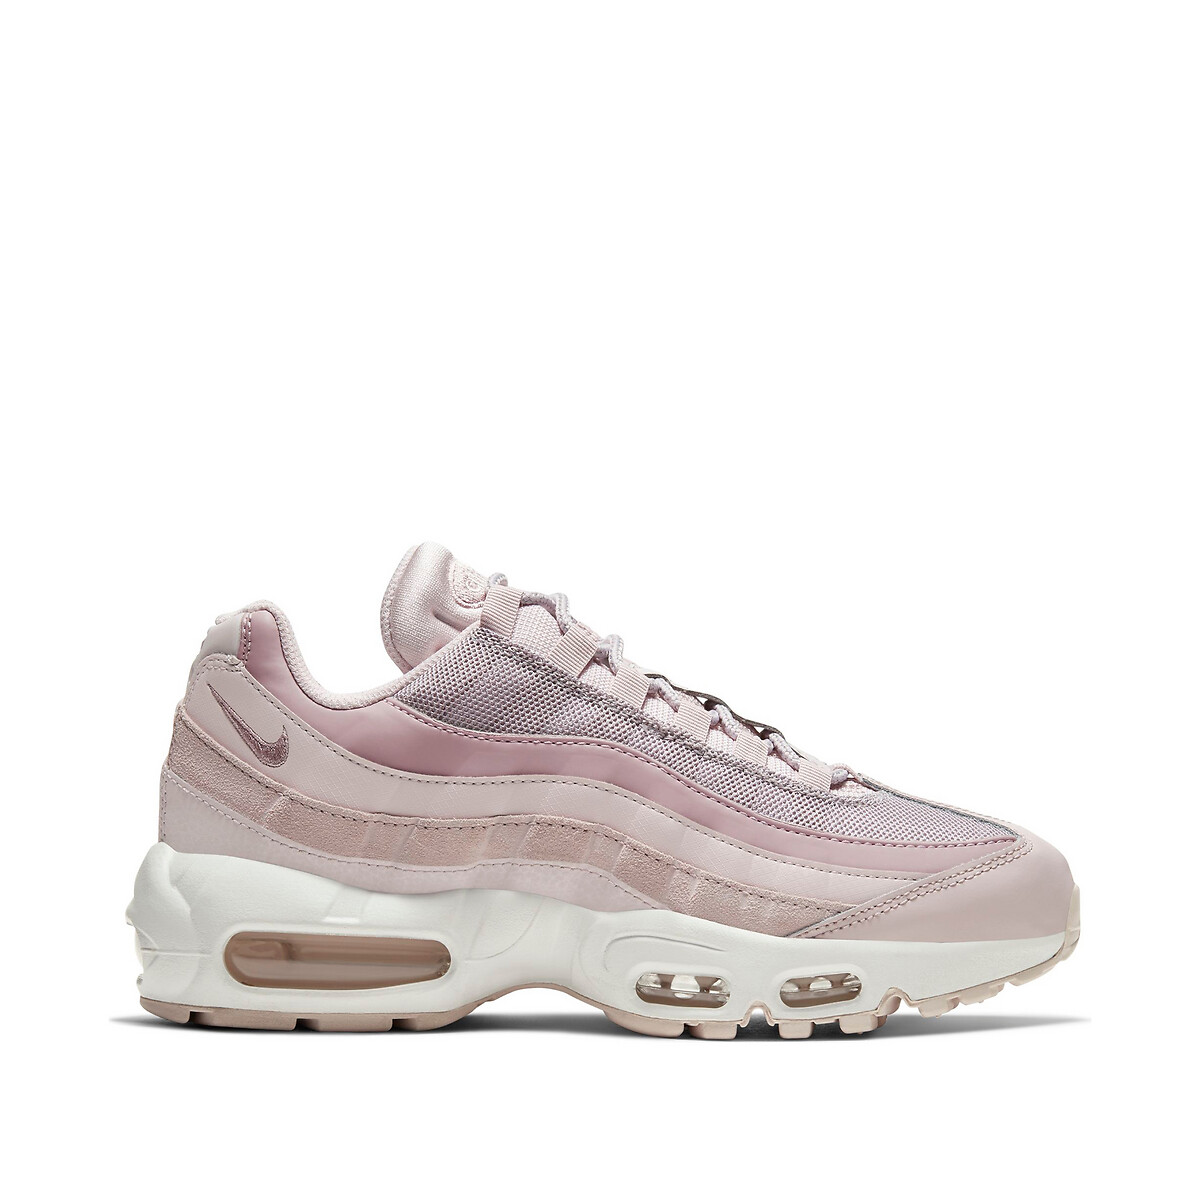 Air max 95 trainers in leather , pink 